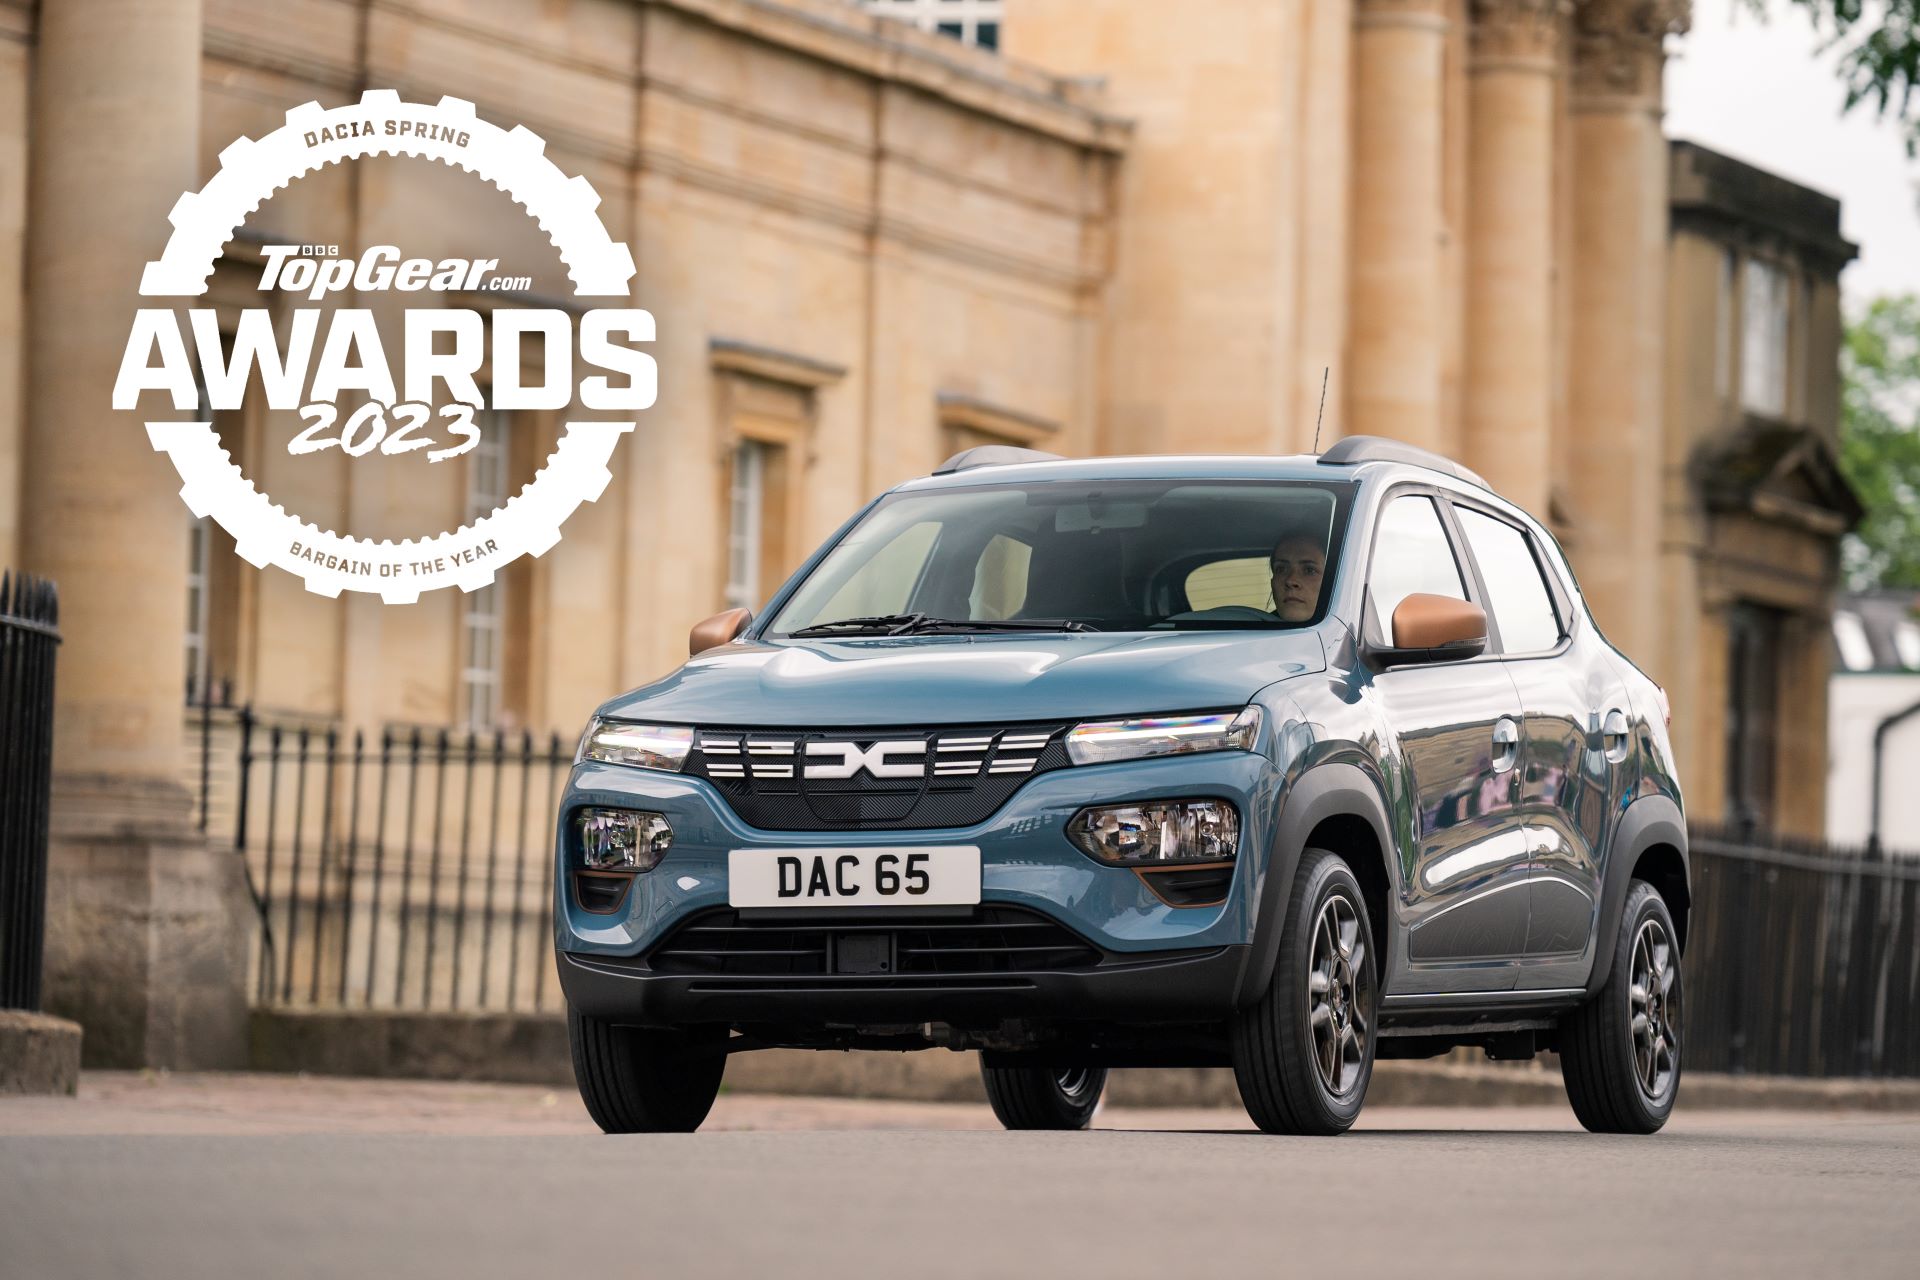 Fully-electric Dacia Spring is Top Gear’s ‘Bargain of the Year’